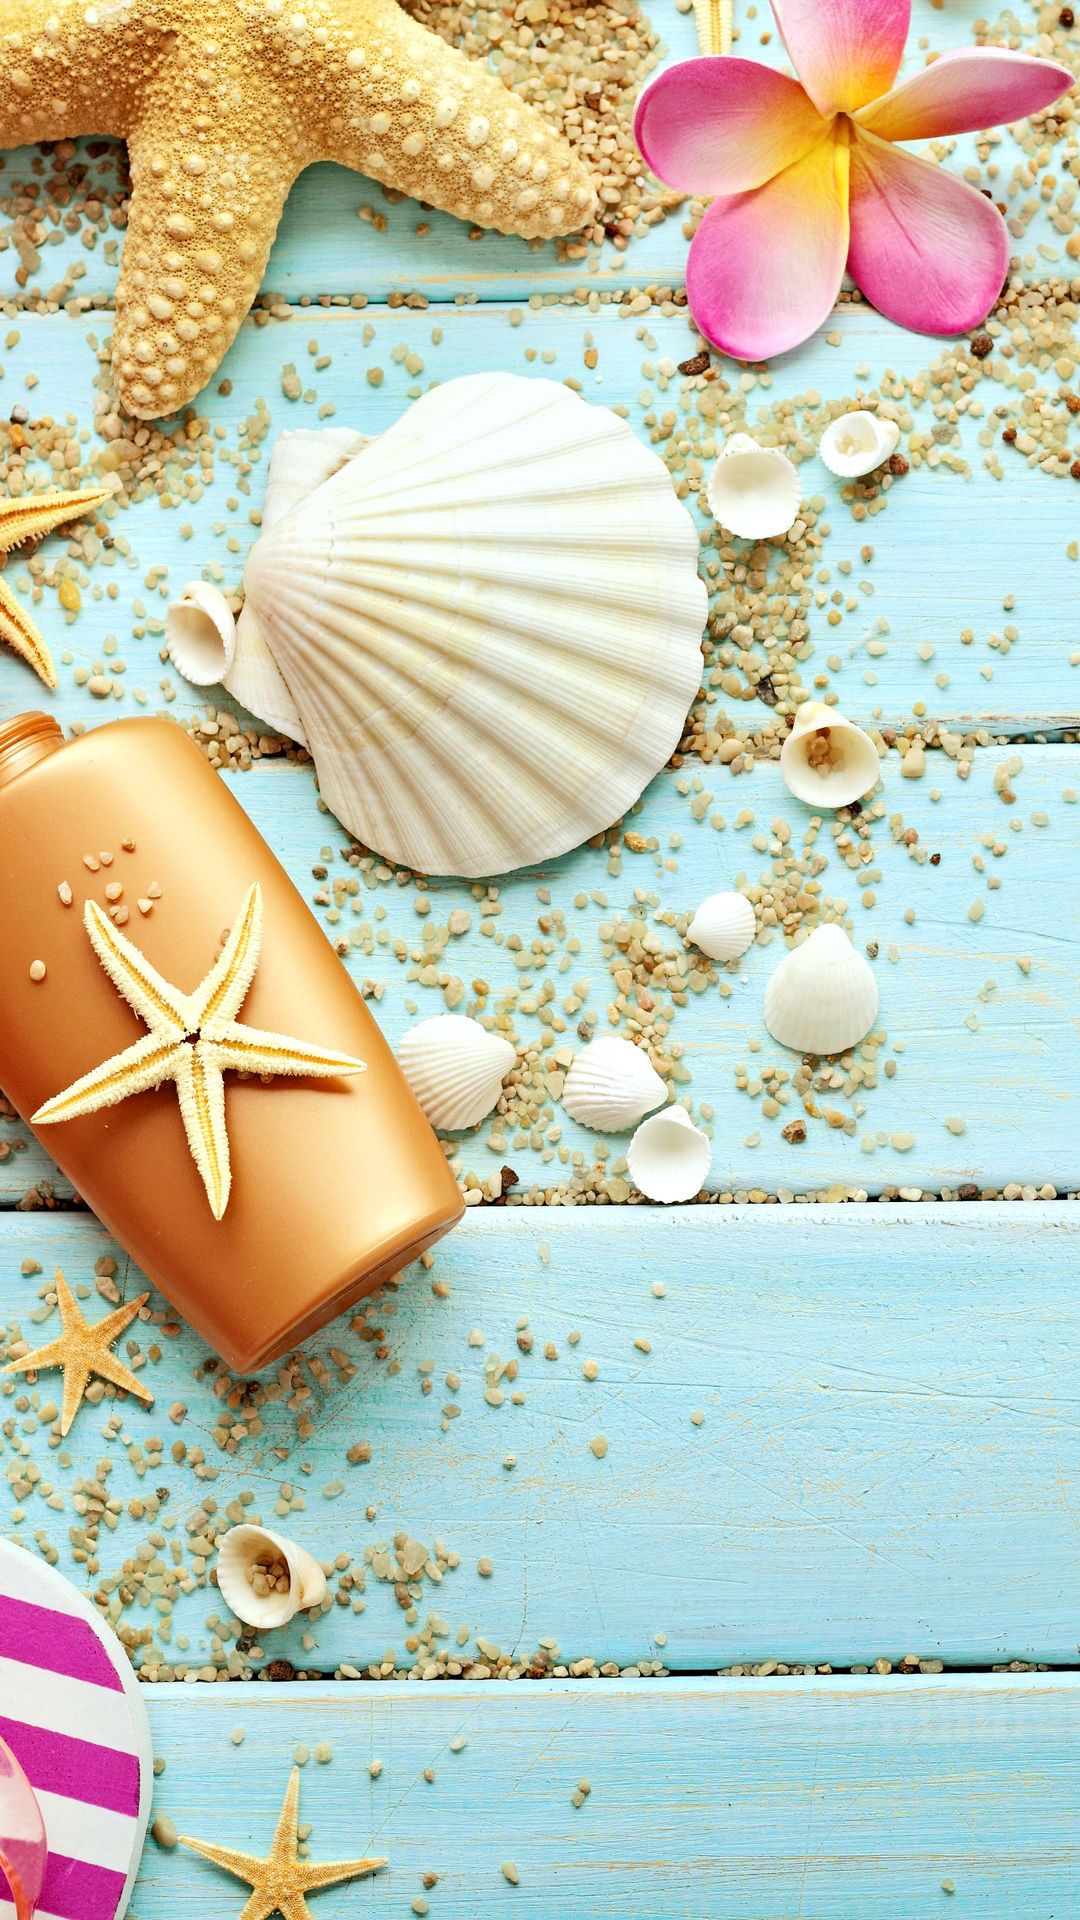 cute summer wallpapers,shell,sand,food,cuisine,natural material